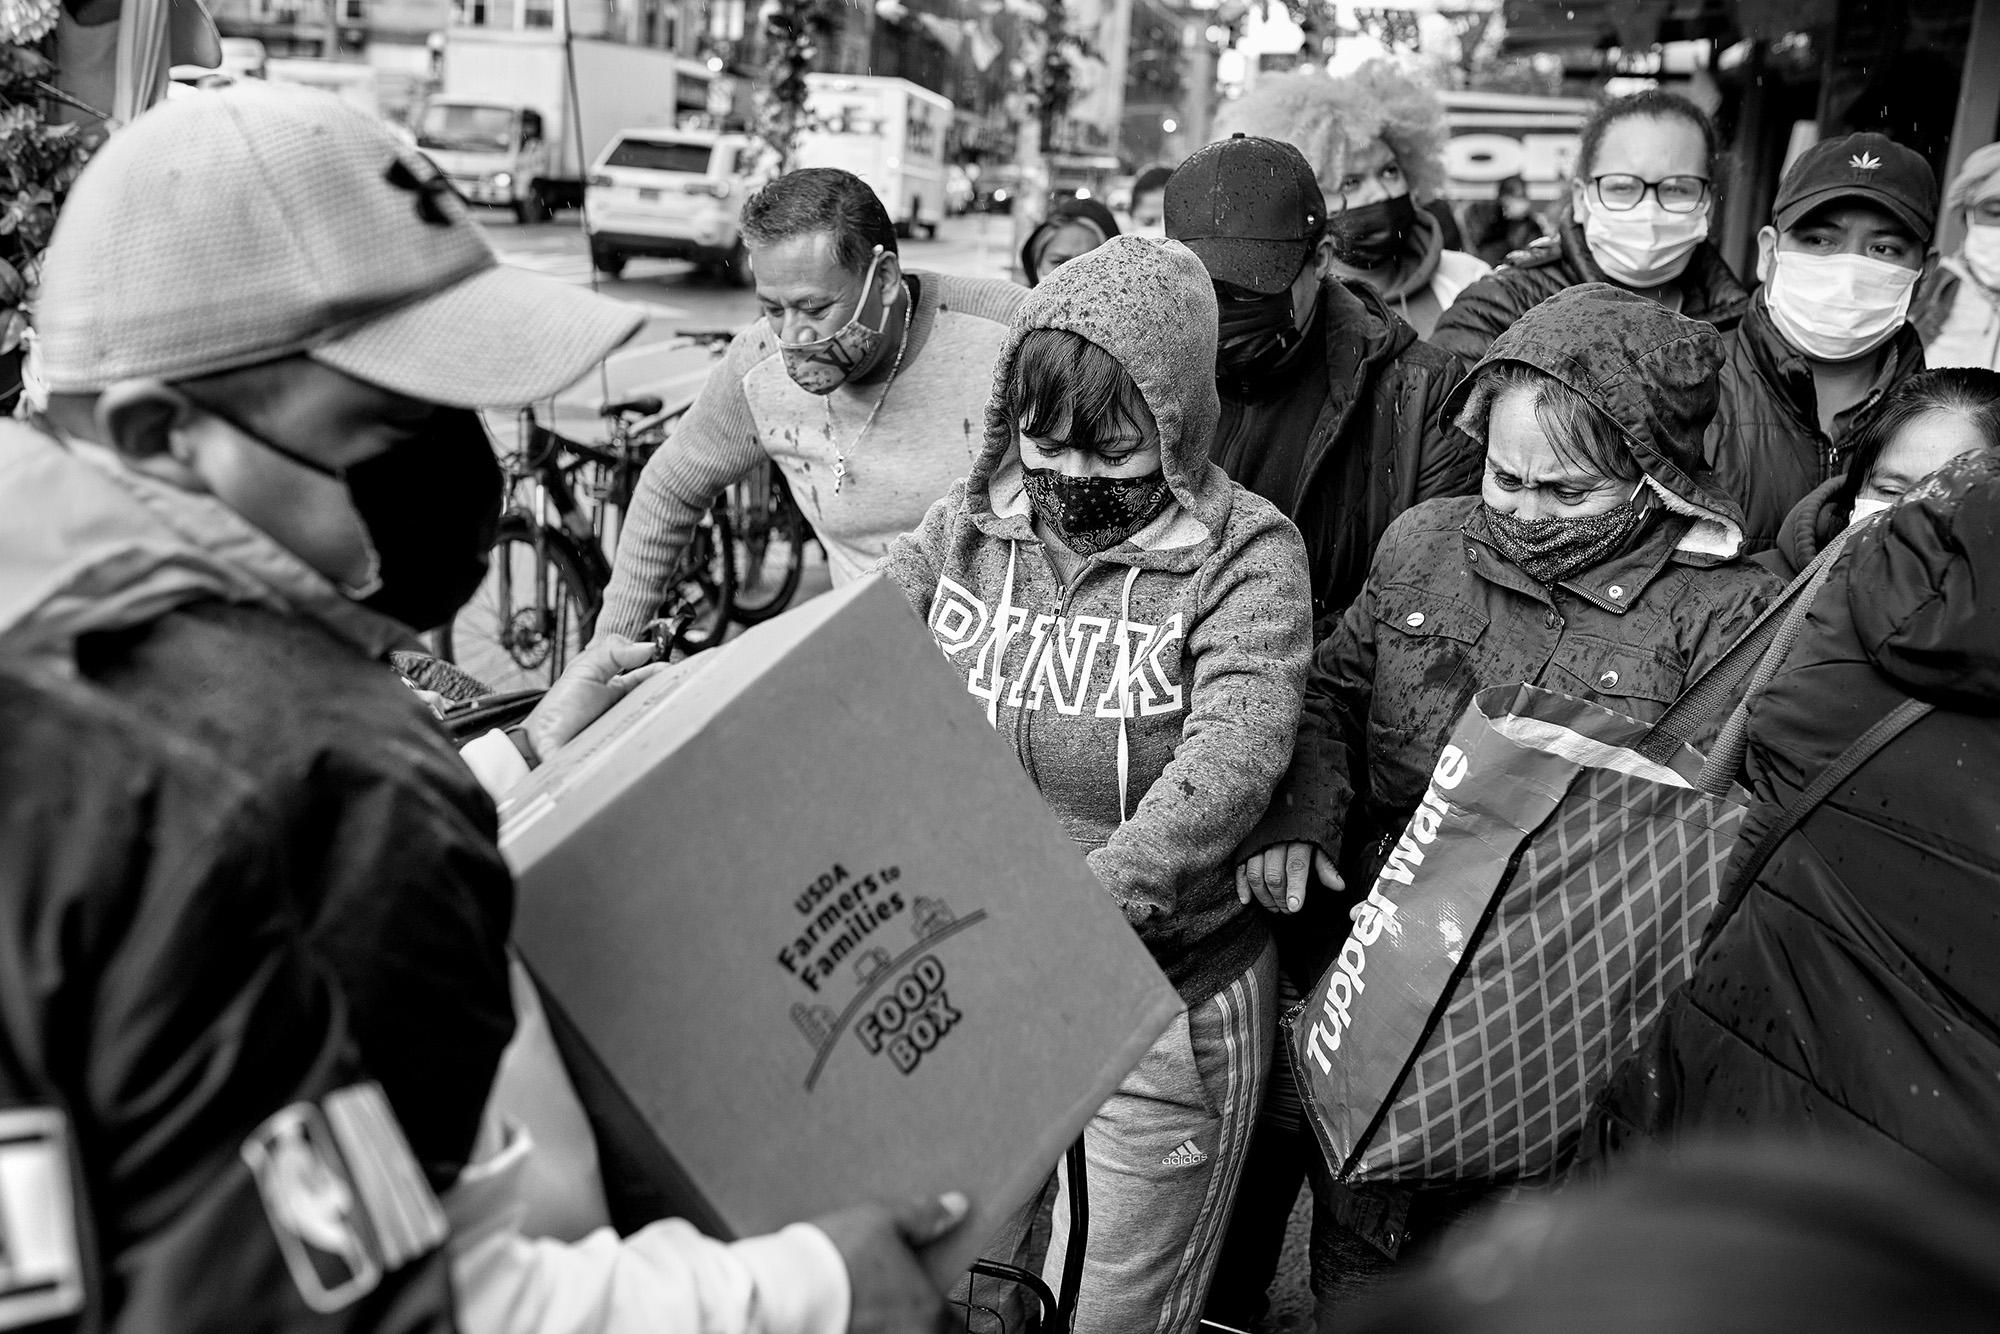 A group of Mexican volunteers distributes boxes of food in the South Bronx. The practice has become common in areas of the city hit hardest by the pandemic and the economic crisis. The distributions are organized by Father Fabián Arias and his network of volunteers. During the pandemic, and still today, migrant mutual aid projects have saved the community from conditions of government neglect. Photo: Edu Ponces/Ruido Photo